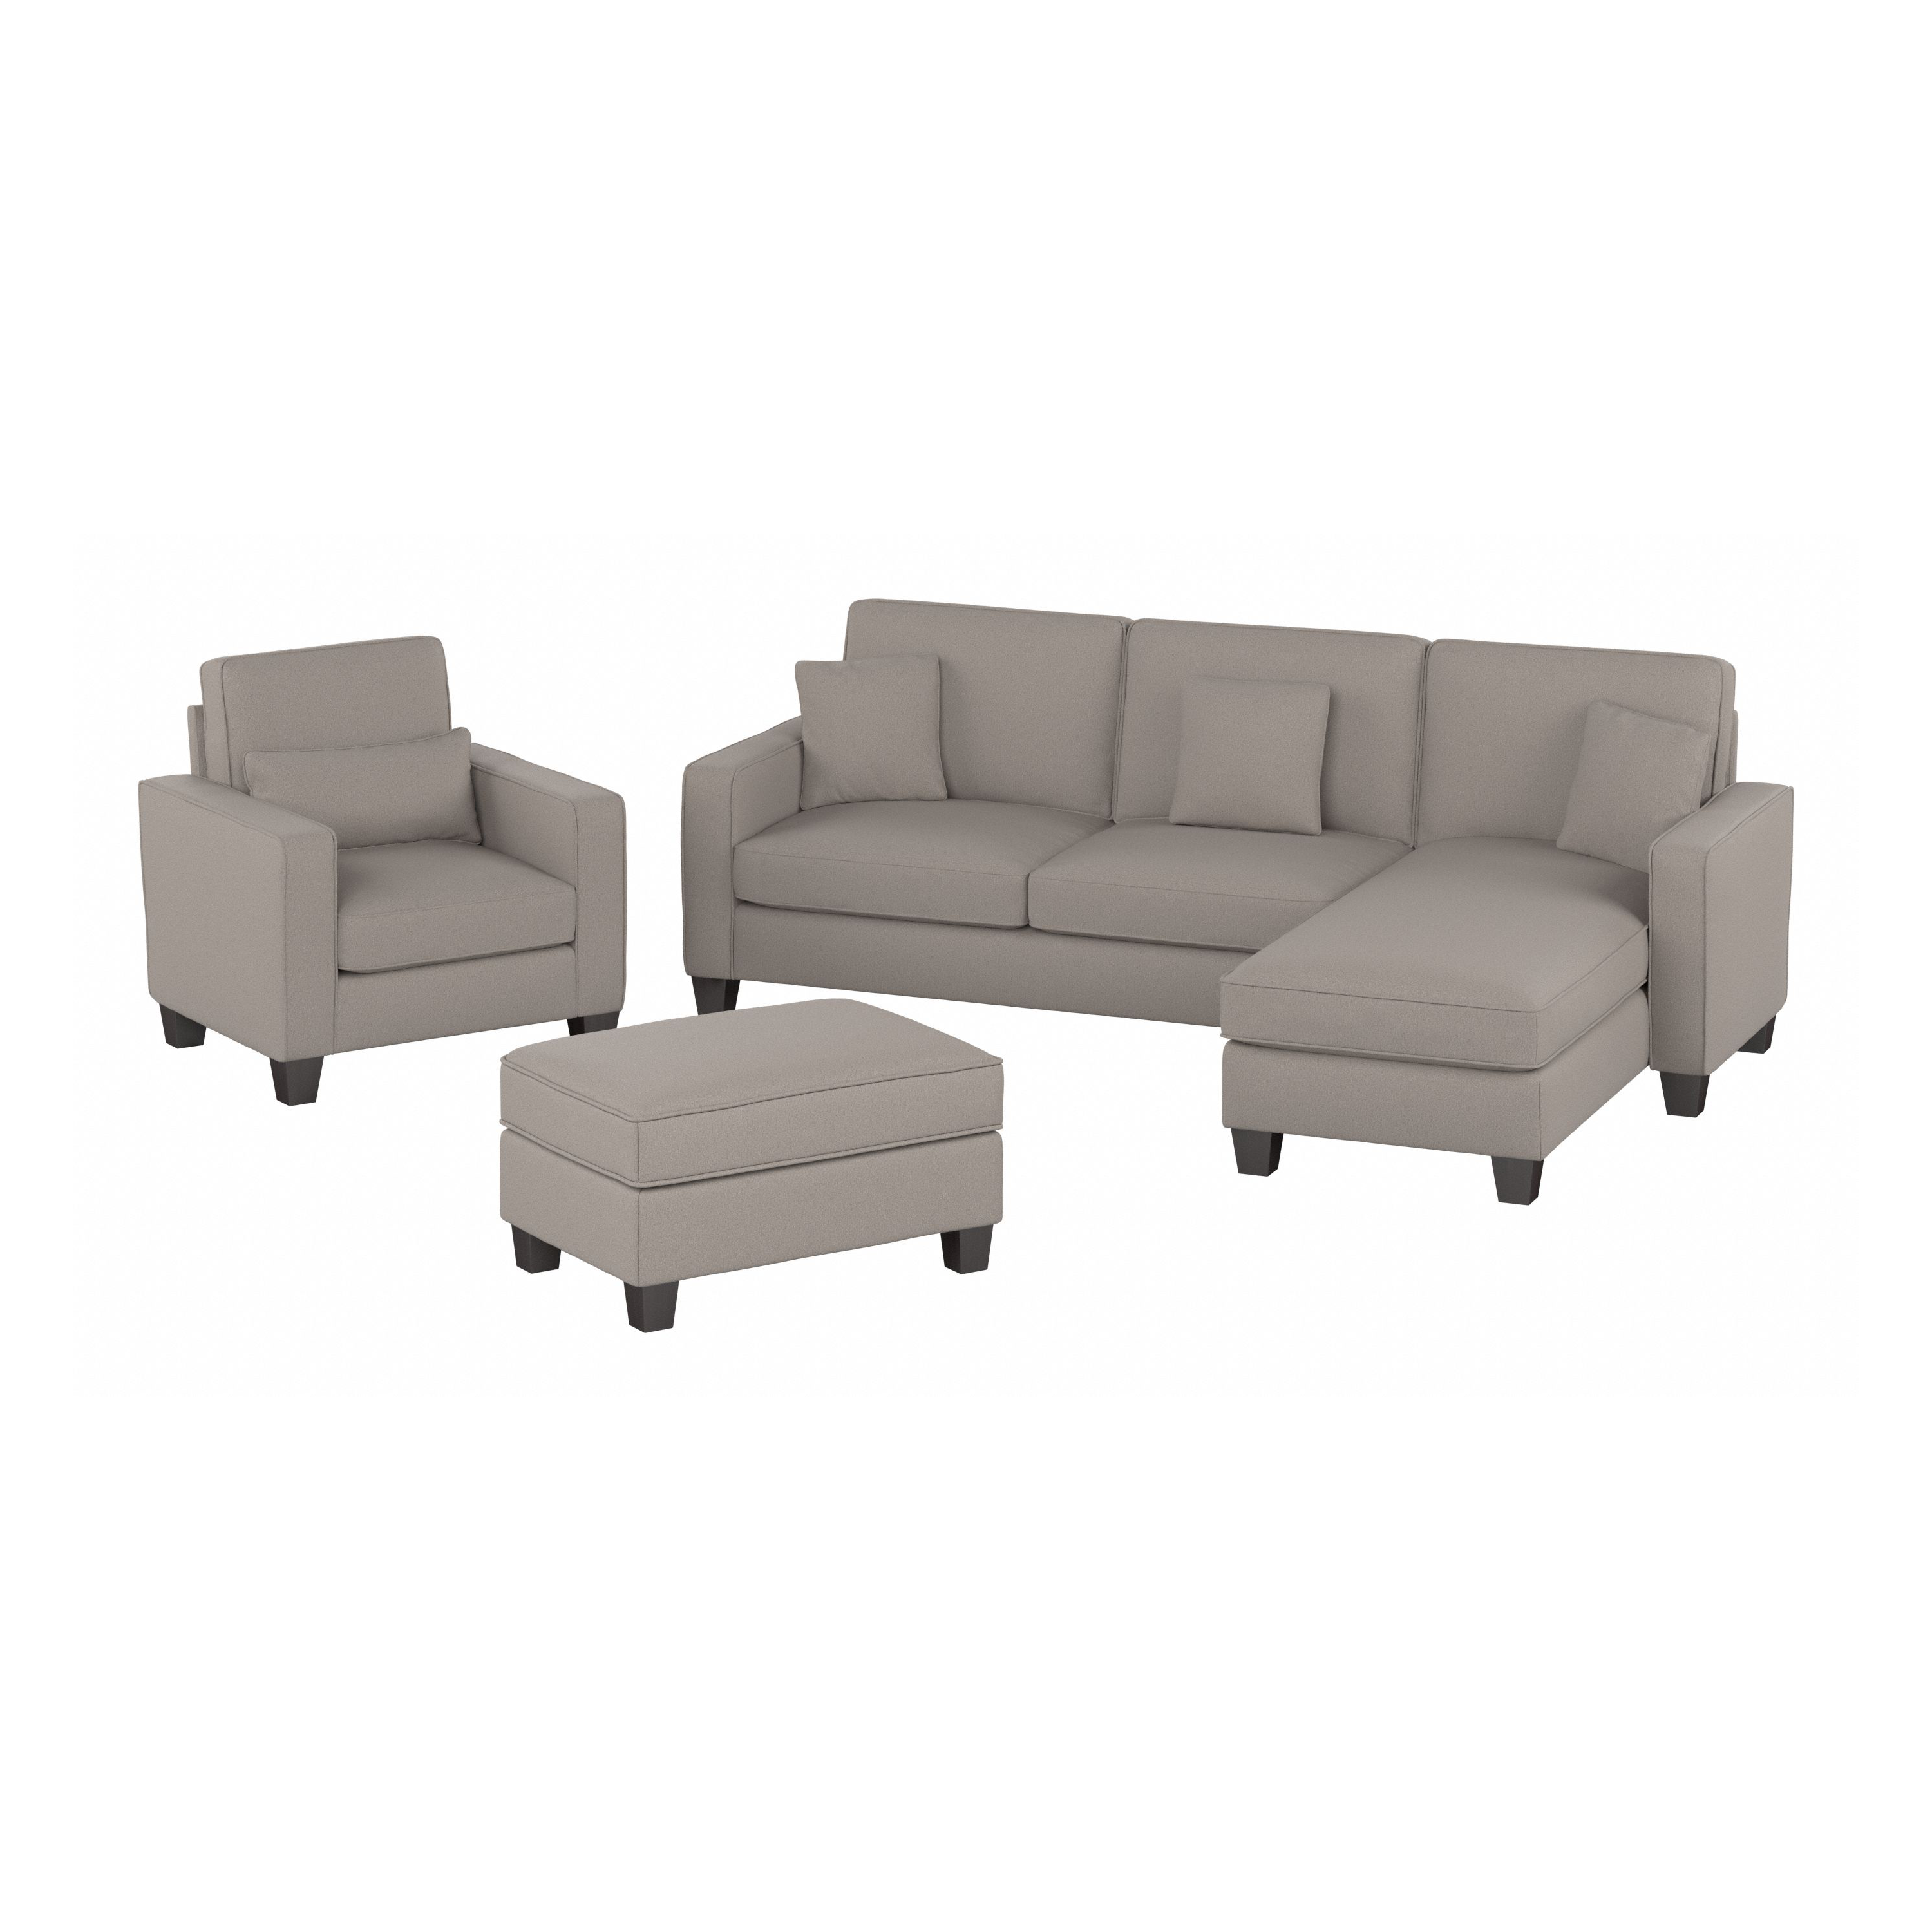 Shop Bush Furniture Stockton 102W Sectional Couch with Reversible Chaise Lounge, Accent Chair, and Ottoman 02 SKT021BGH #color_beige herringbone fabric